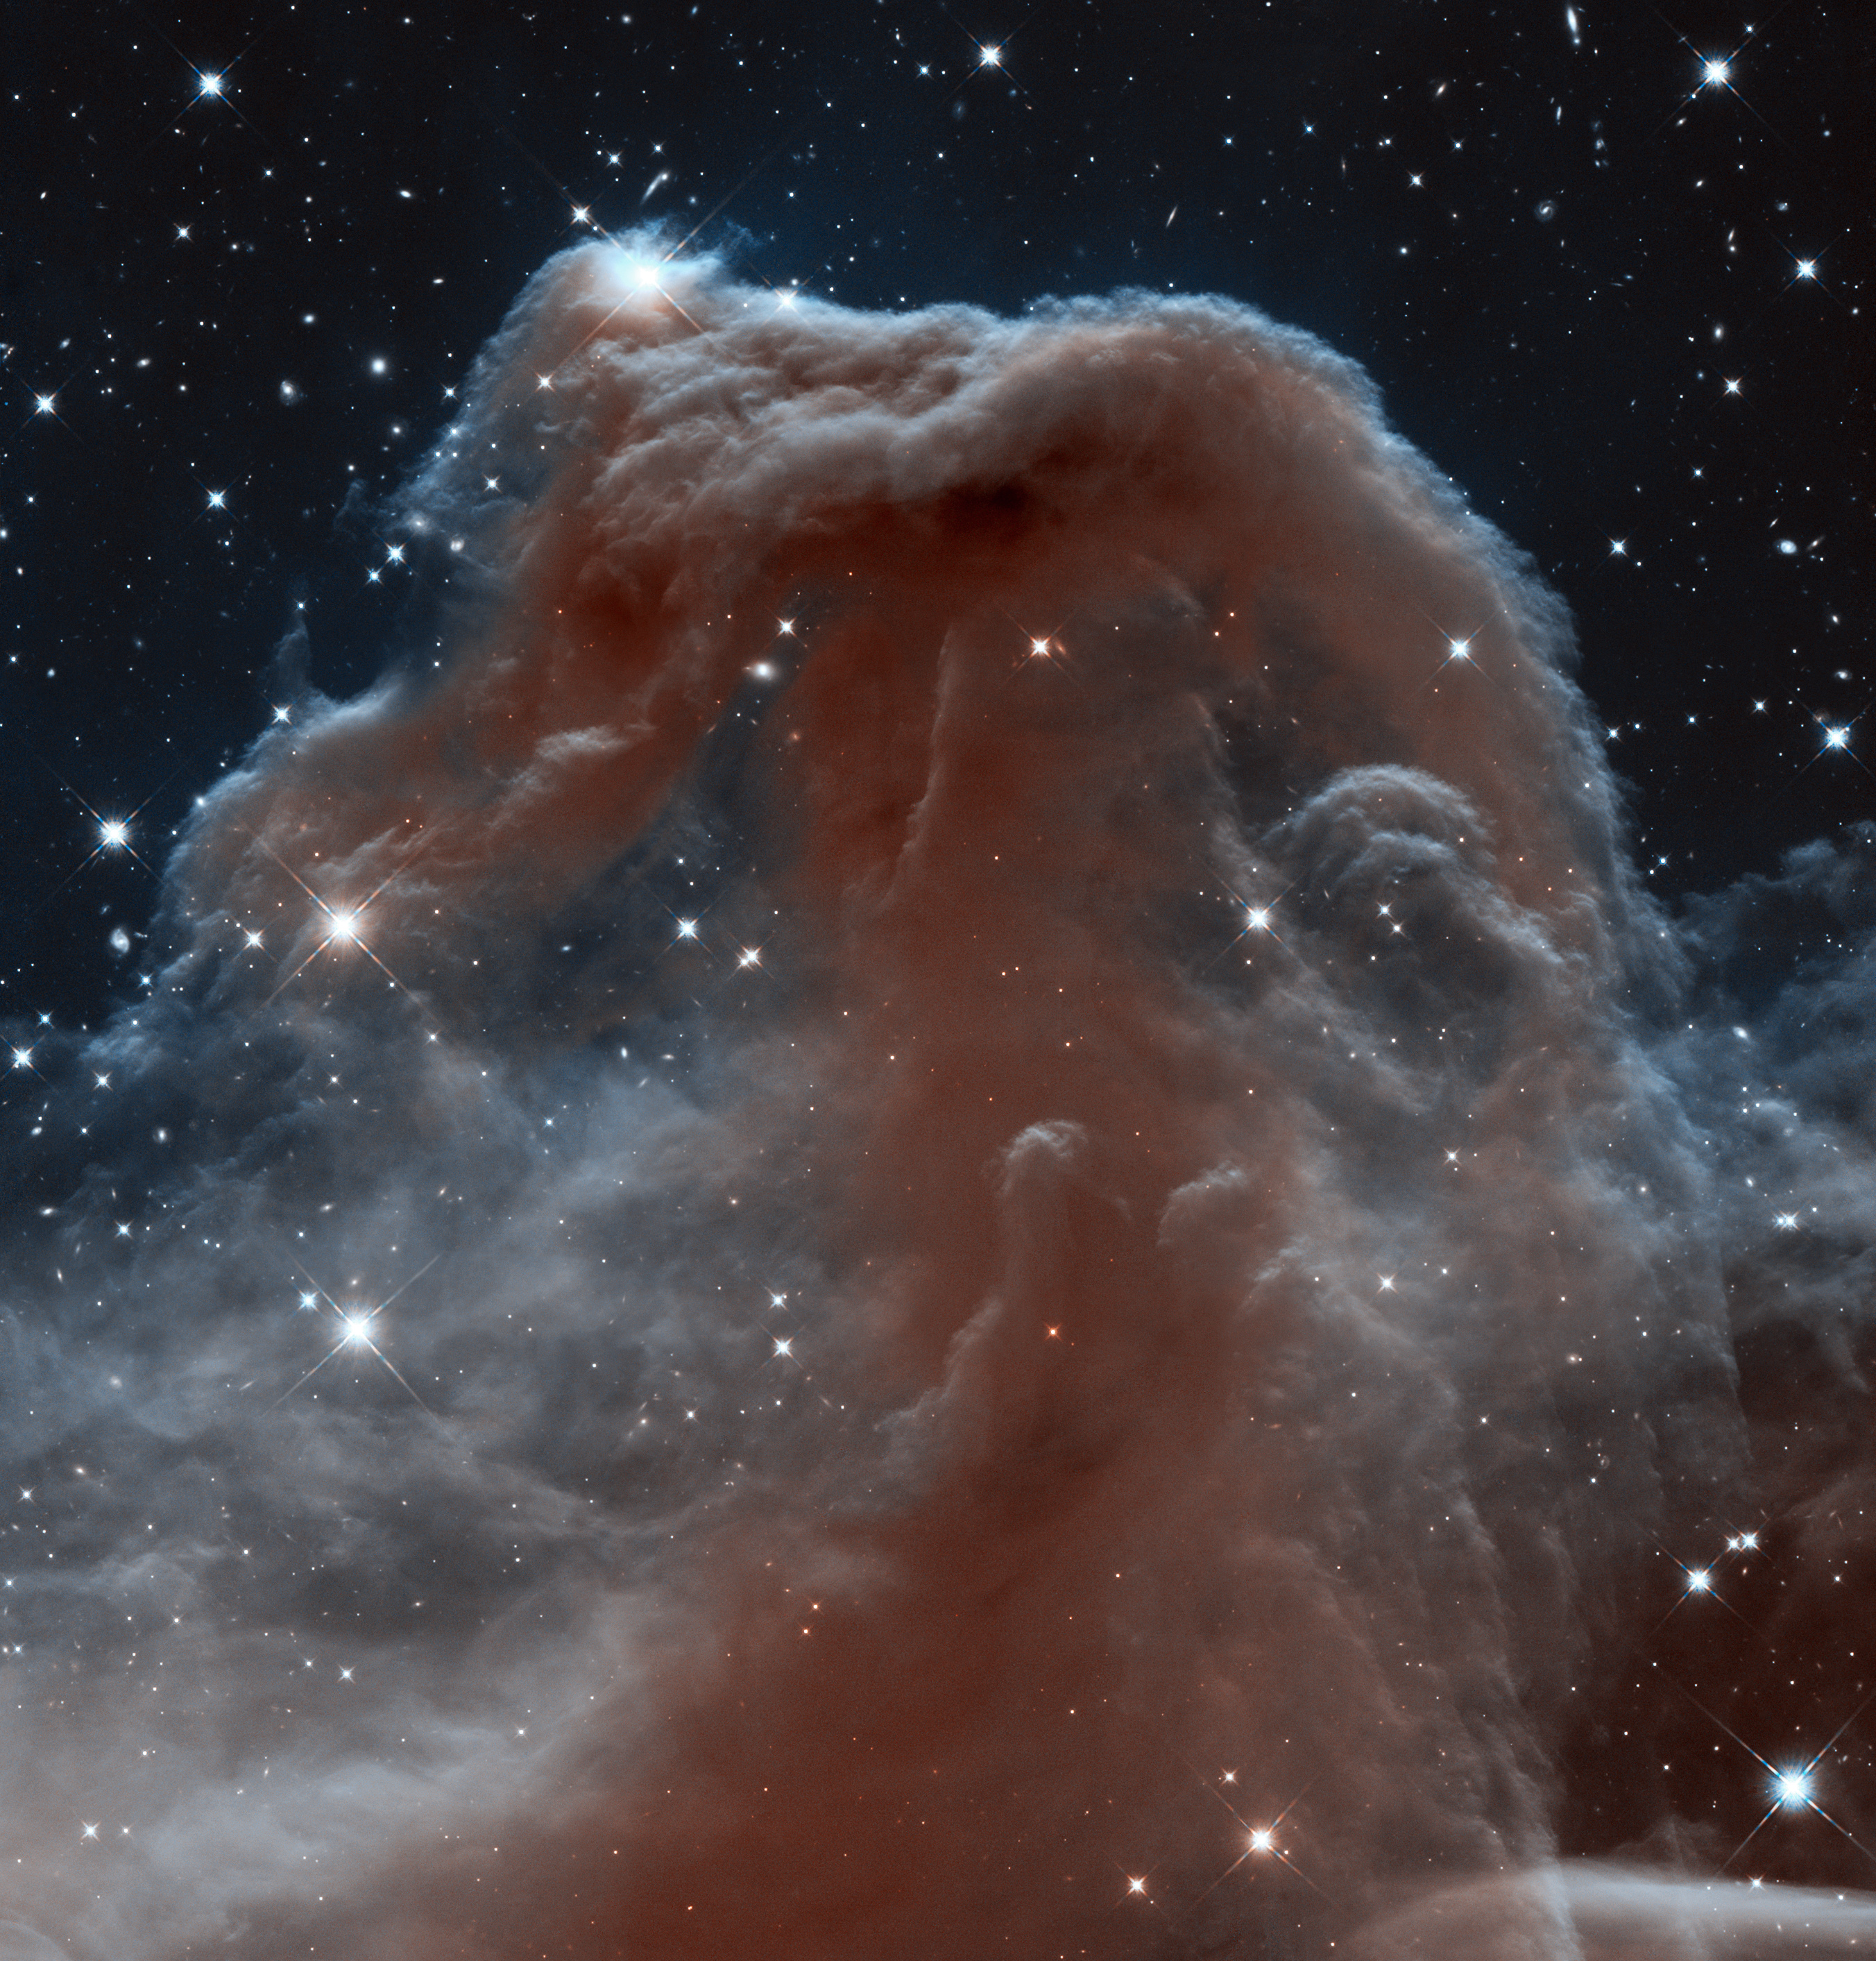 Here's what the Horsehead Nebula looks like, for those who were wondering.